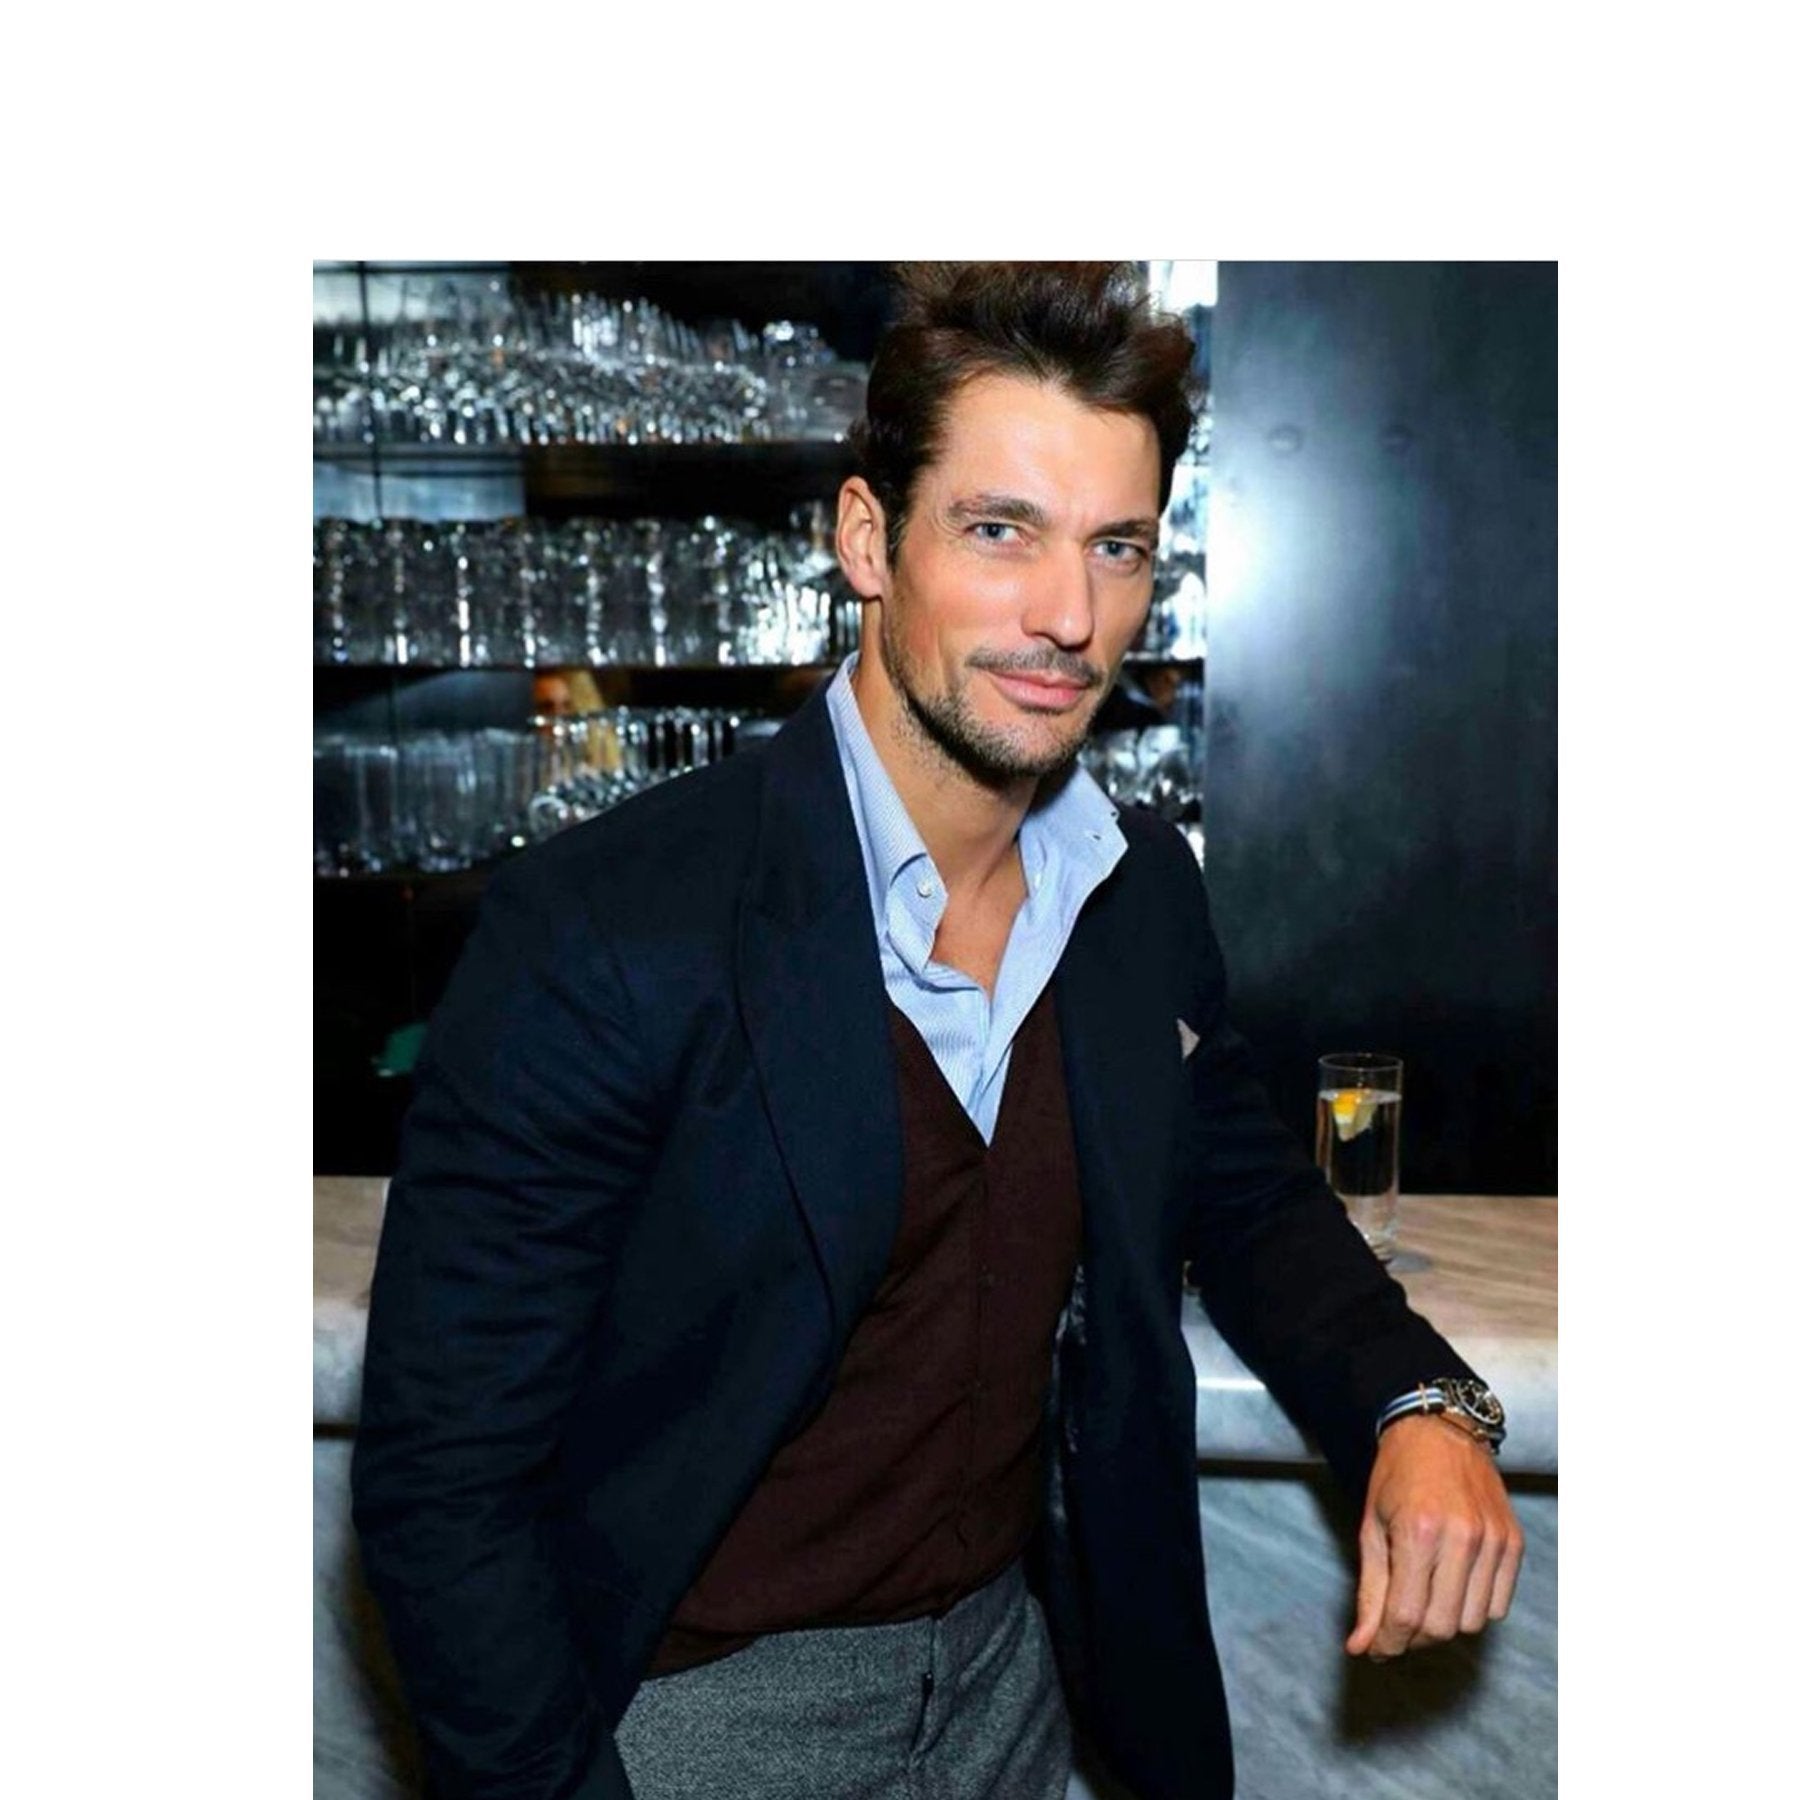 David Gandy wears his Bespoke Emma Willis shirt to the launch of British Vogue Editor in Chief Alexandra Schulman’s book Inside Vogue : A diary of my 100th year. - Emma Willis